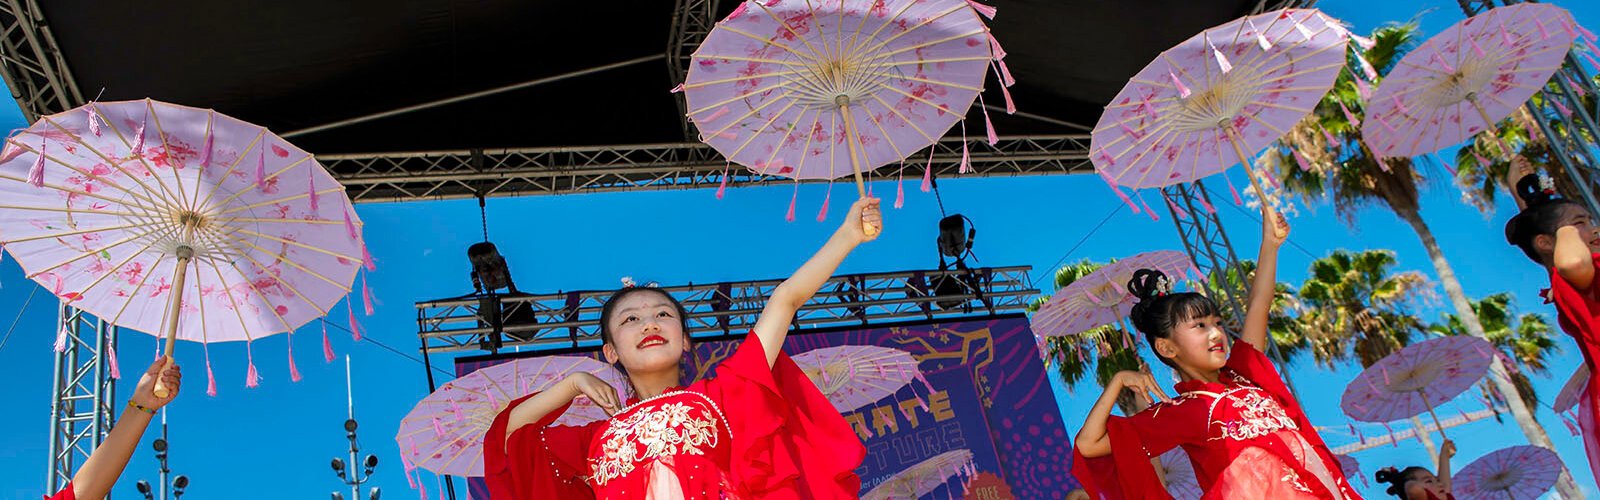 The City of Tampa's Asian Pacific Islander Cultural Festival at Curtis Hixon Waterfront Park celebrates Asian American Pacific Islander Heritage Month.